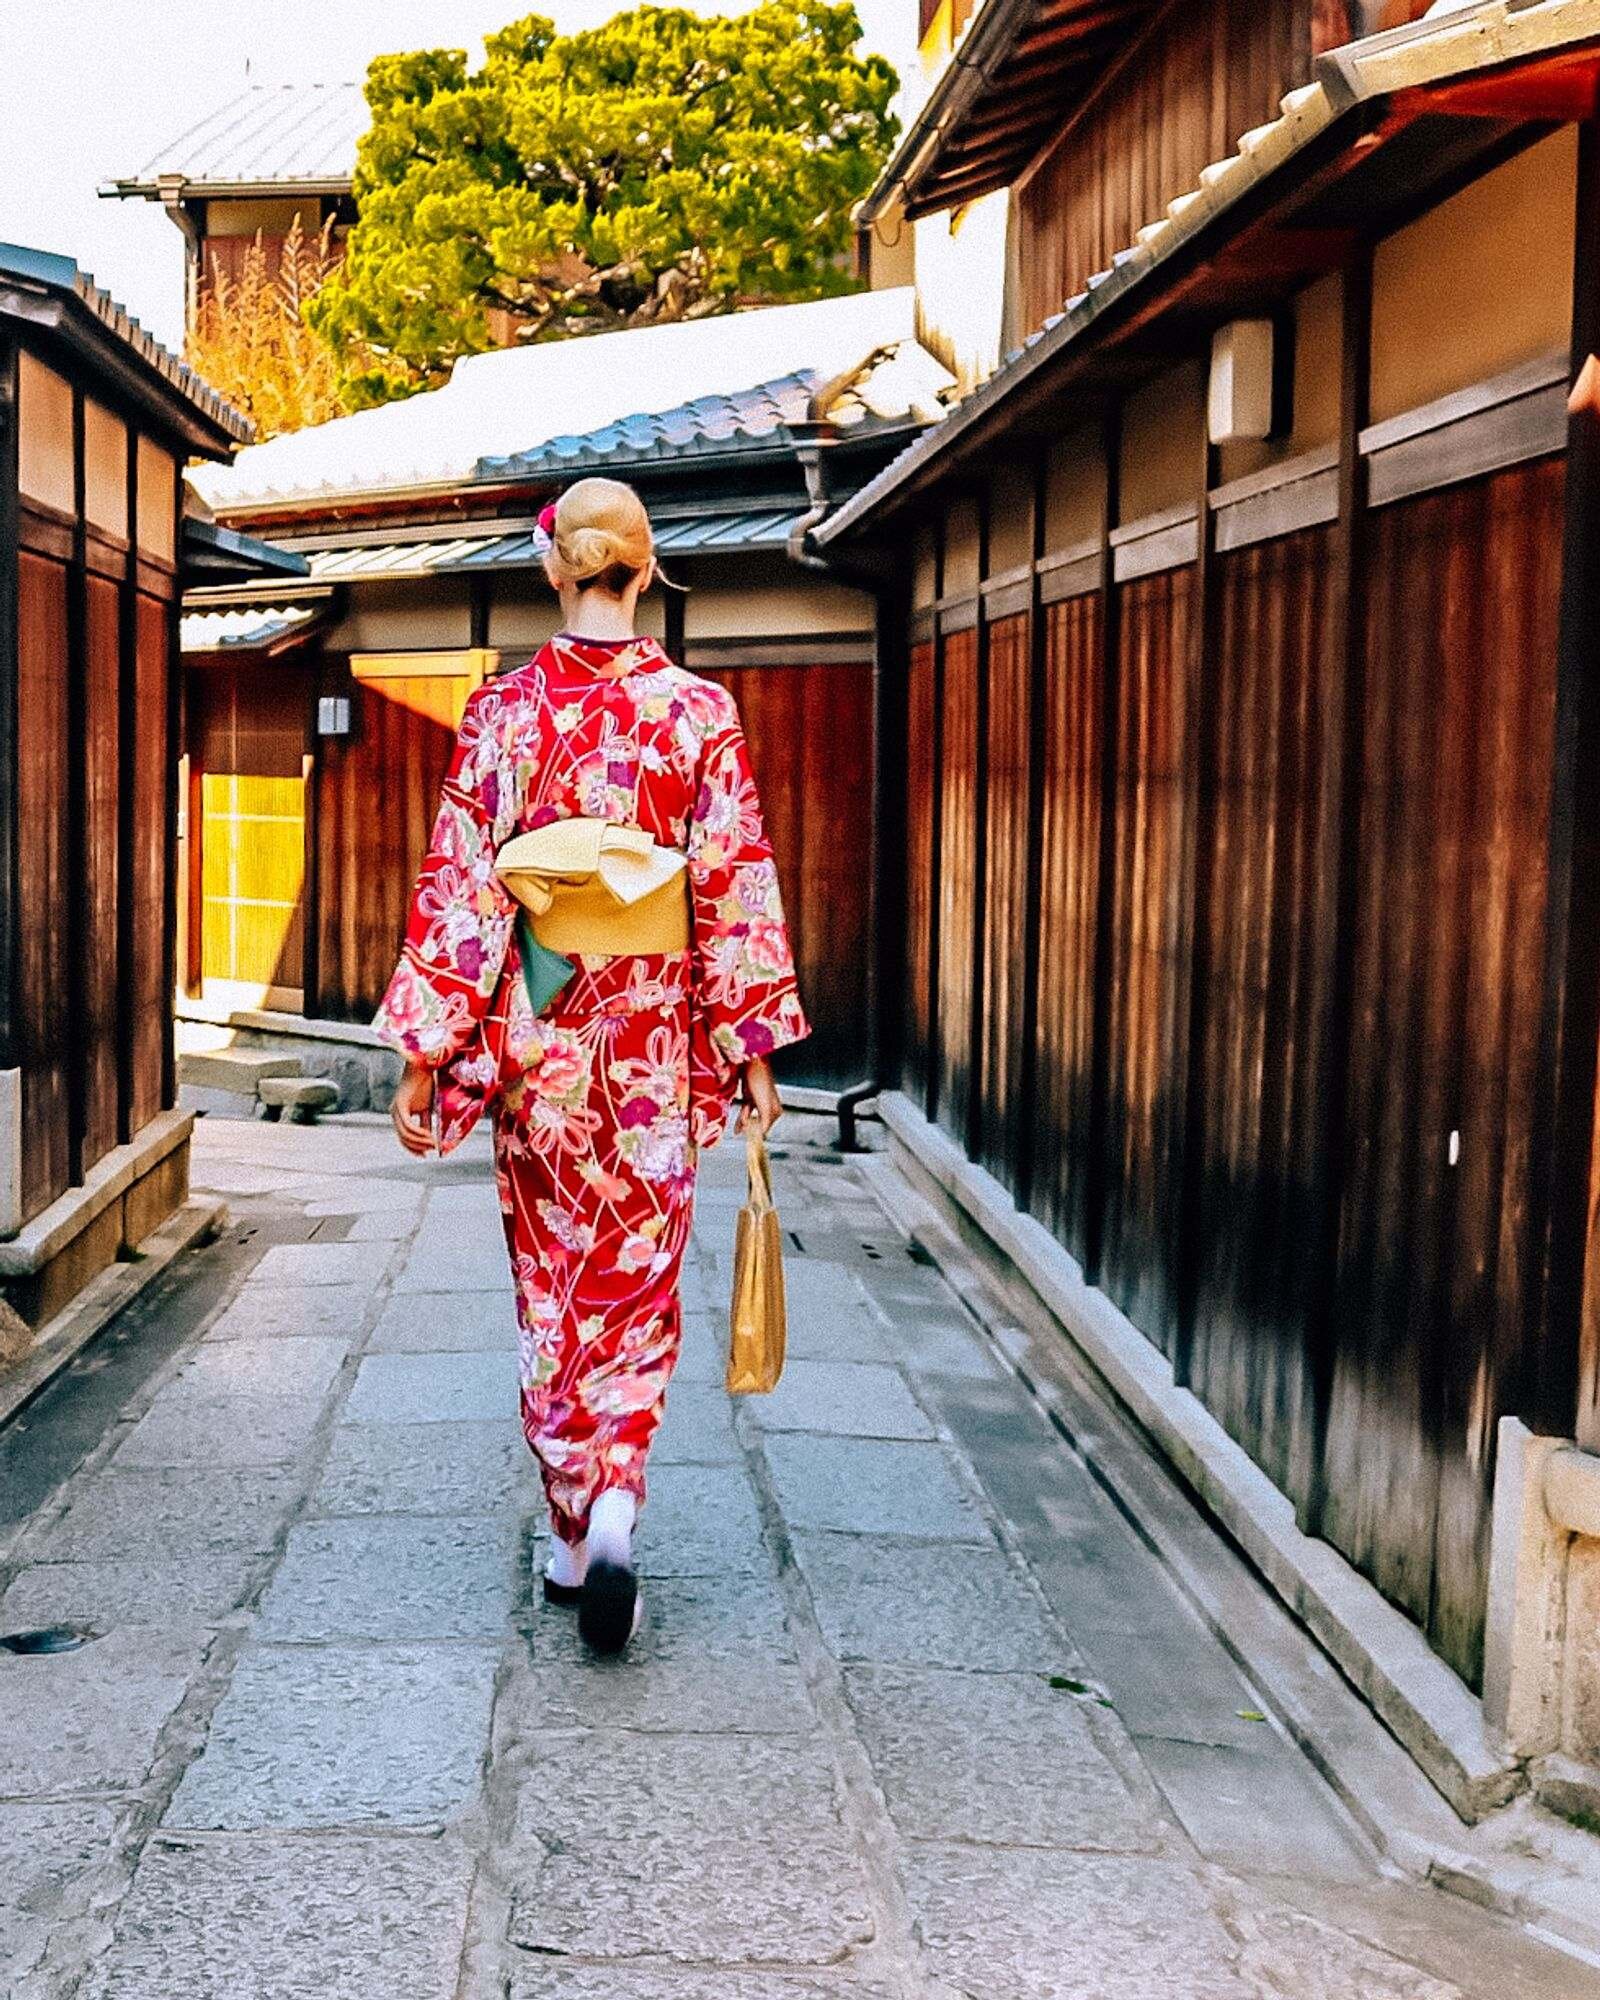 Helena wearing a colorful red kimono walking down the traditional Japanese streets of Kyoto